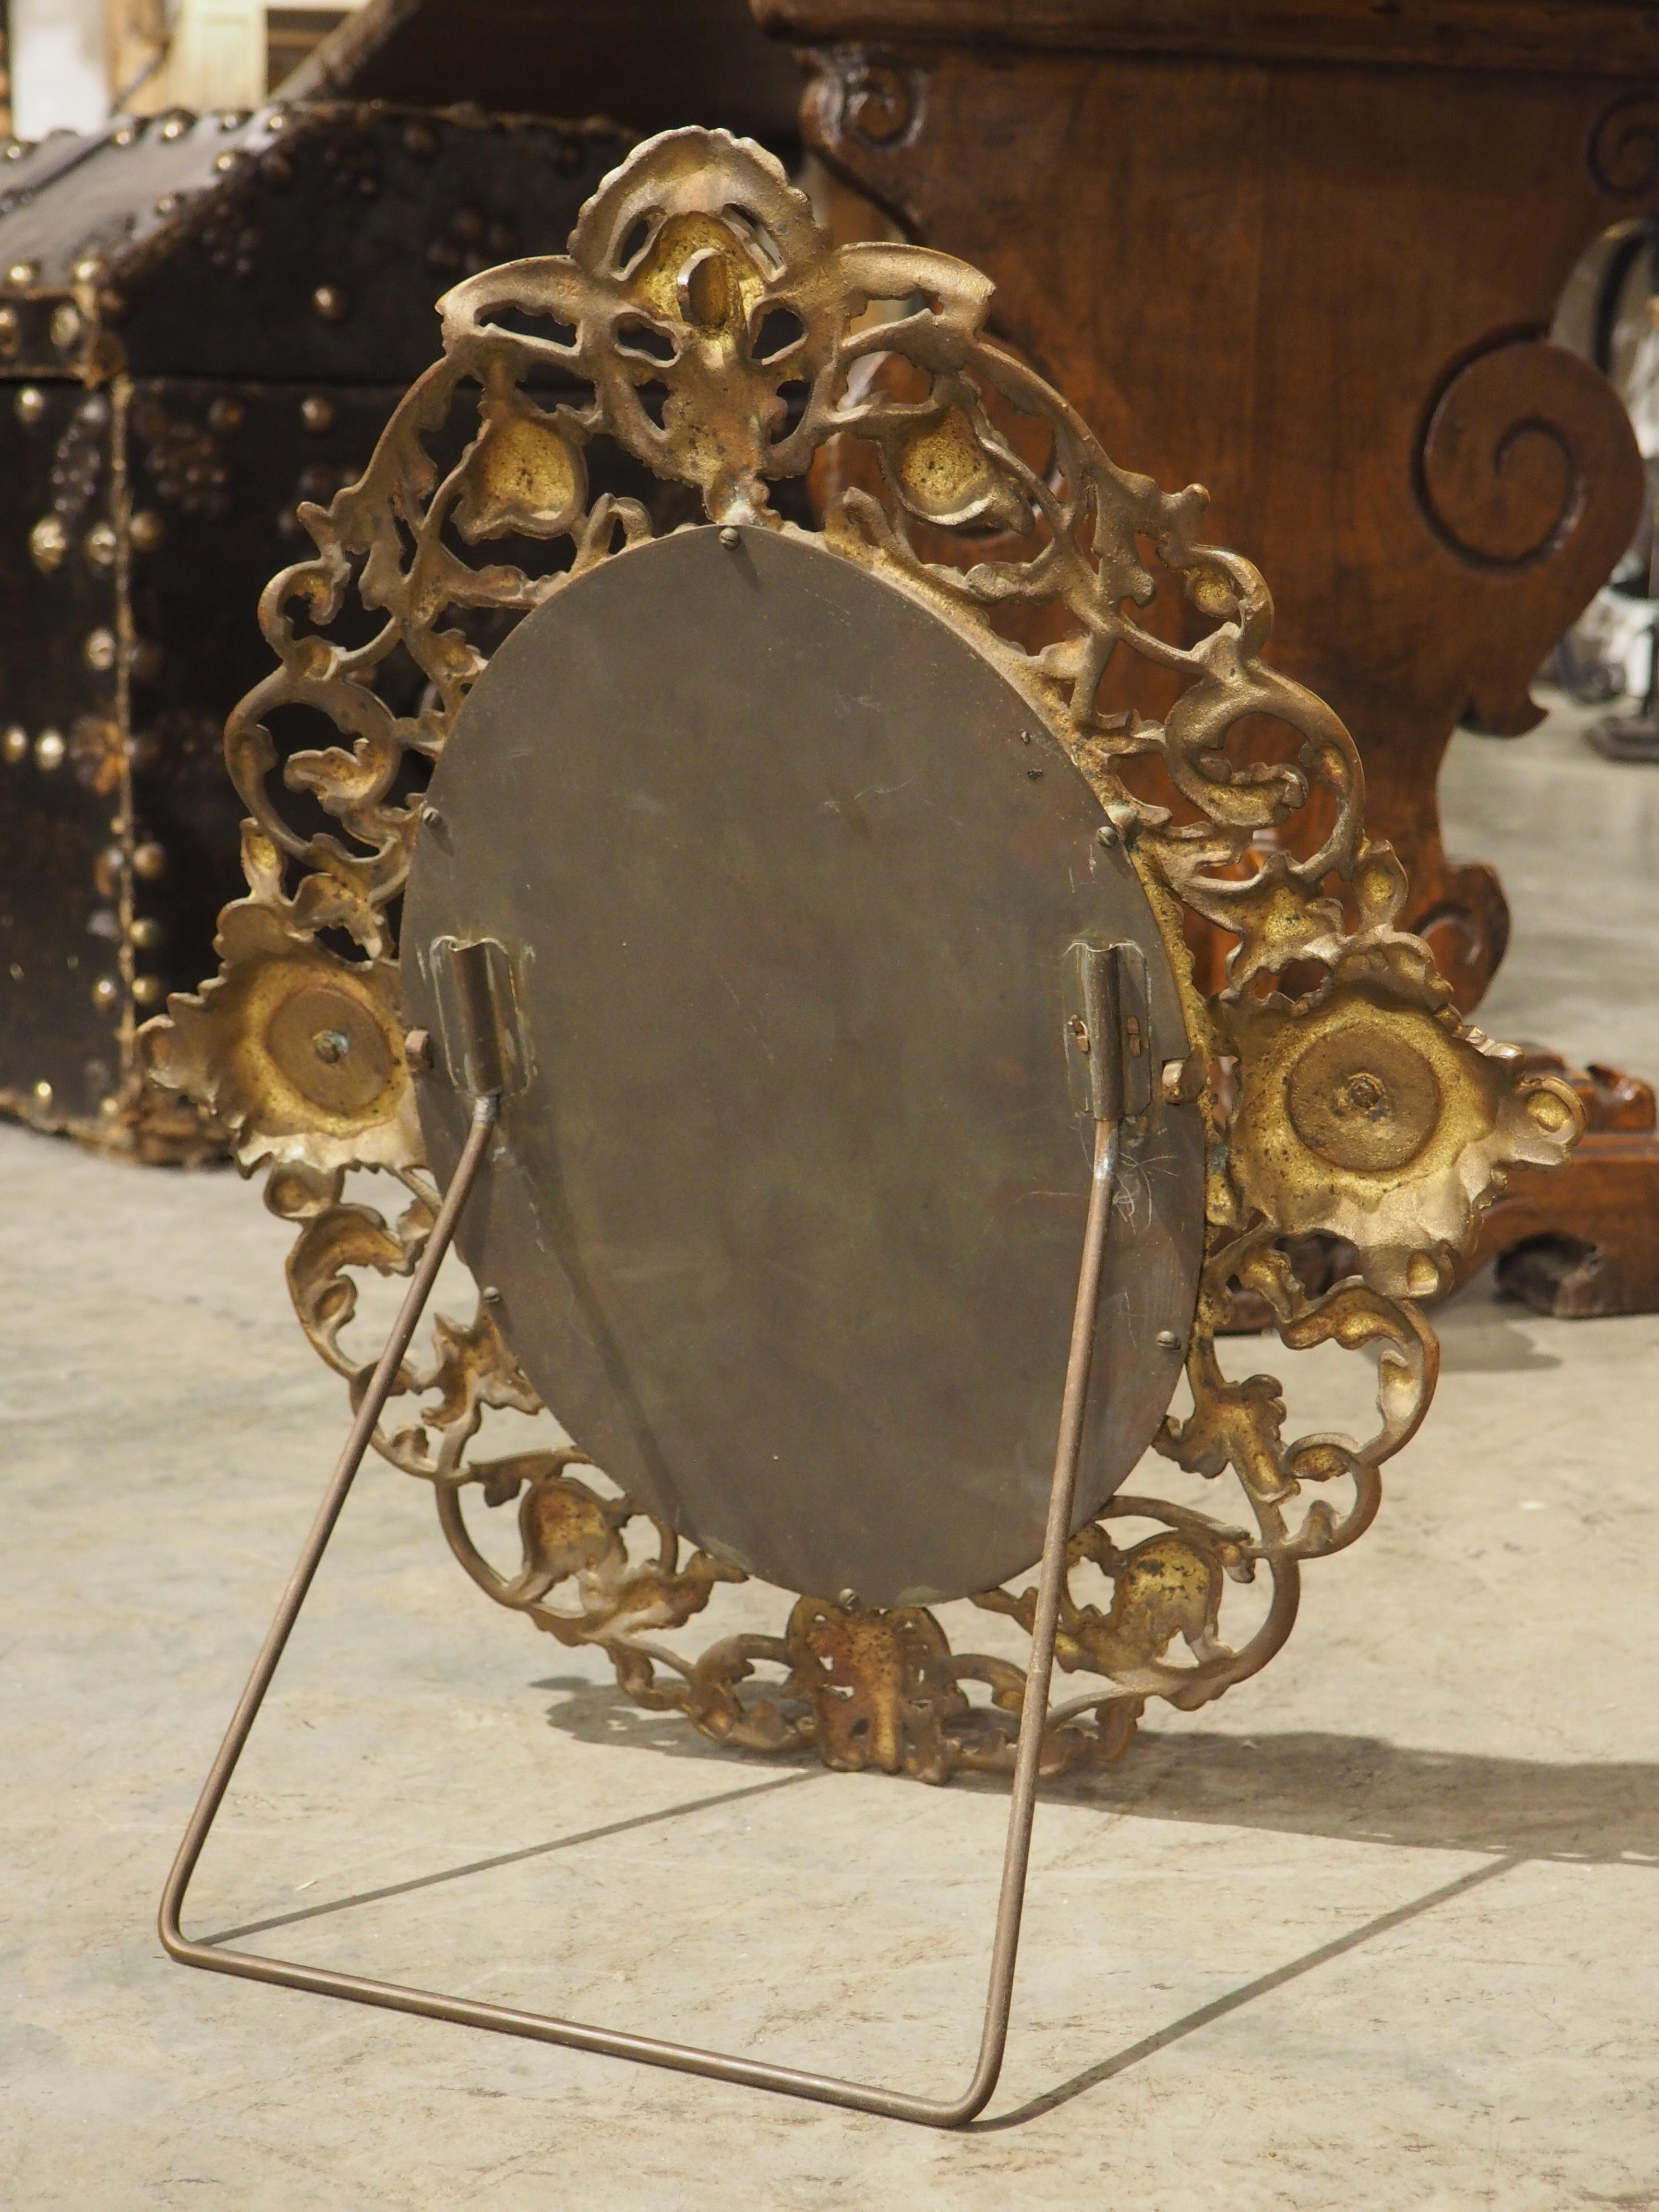 Circa 1900 Oval Gilt Bronze Table Mirror from Italy For Sale 8